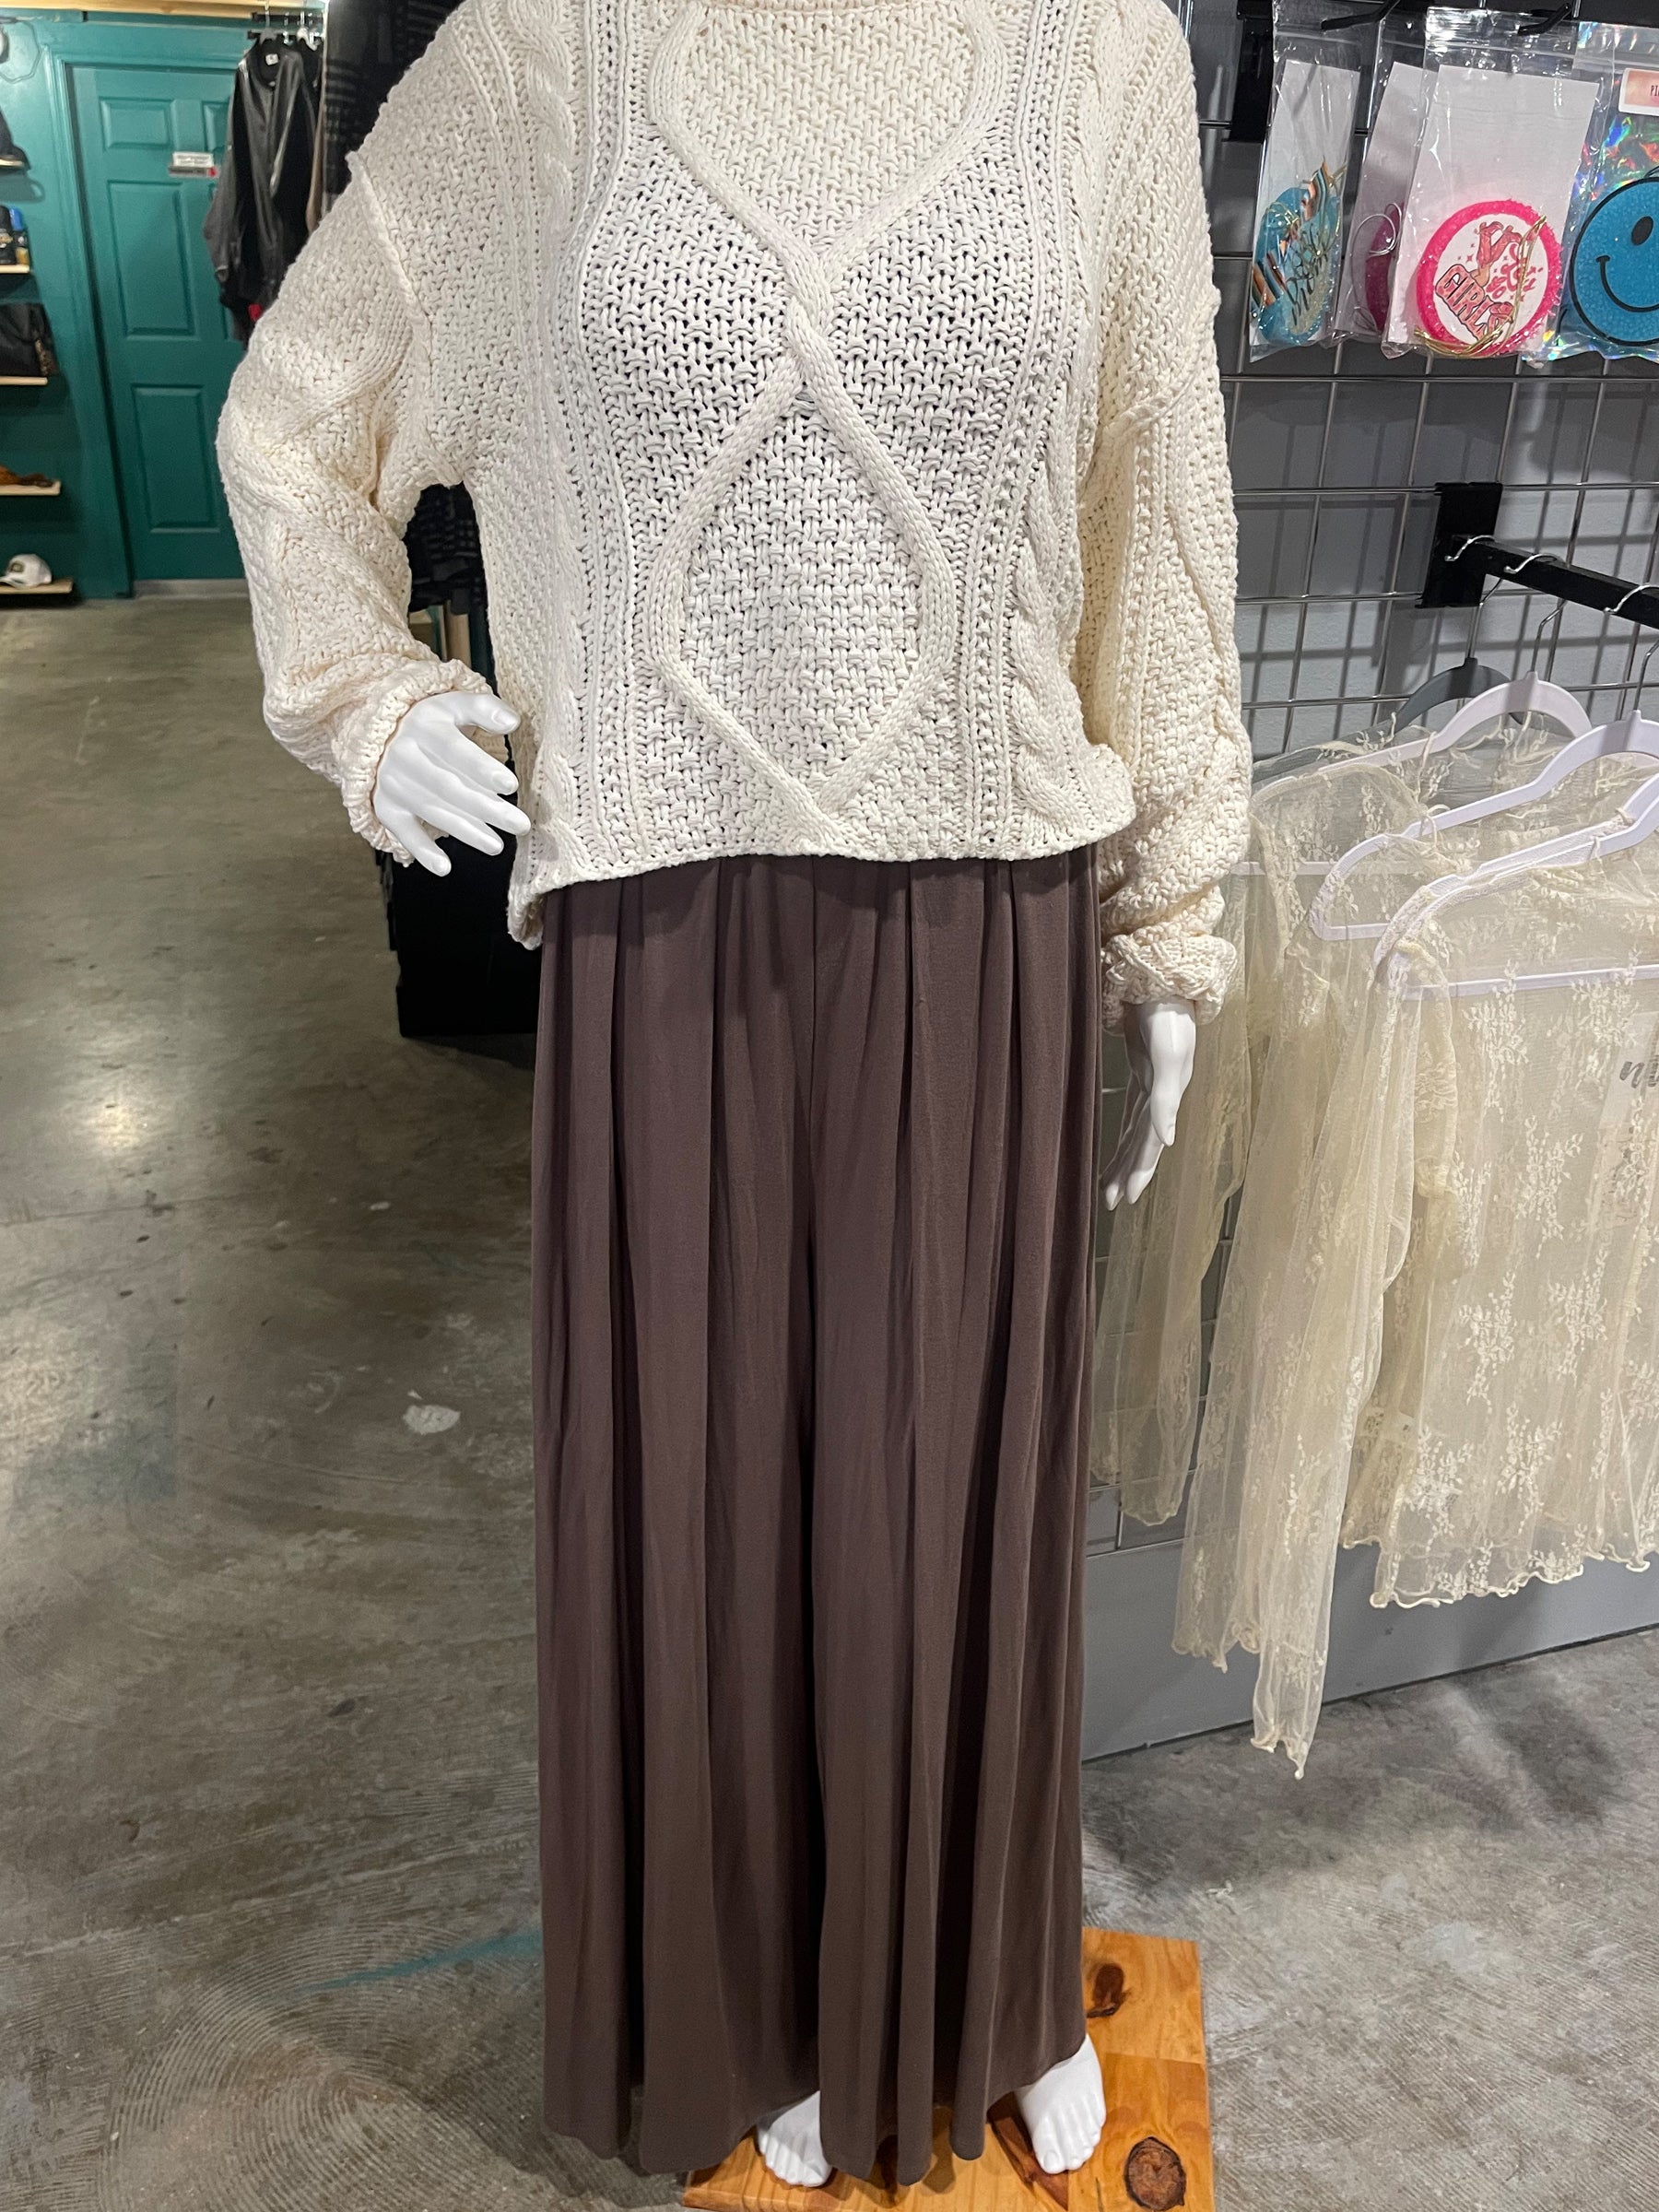 Truly a beautiful and classic look to these simple but stunning draped slacks! Super comfy and easy to wear 95% polyester / 5% spandex, you could literally sleep in them! Elastic waste, super wide leg, see photos. Perfect for all your cream or oatmeal looks or add a dash of color. By Easel.